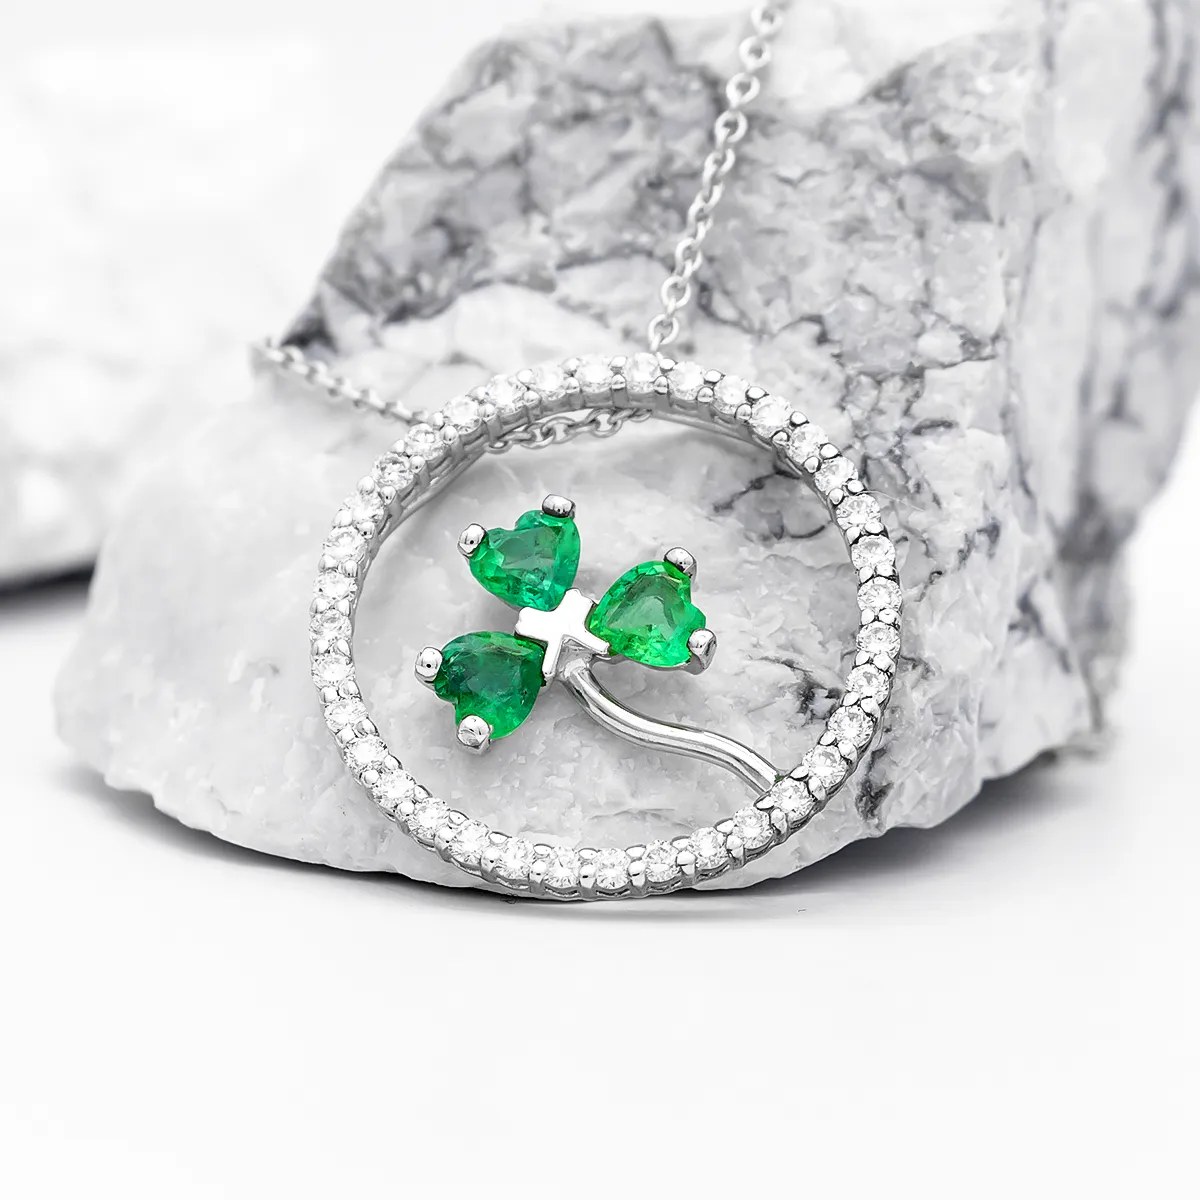 White Gold Shamrock In Circle Pendant Set with Emeralds and Diamonds...